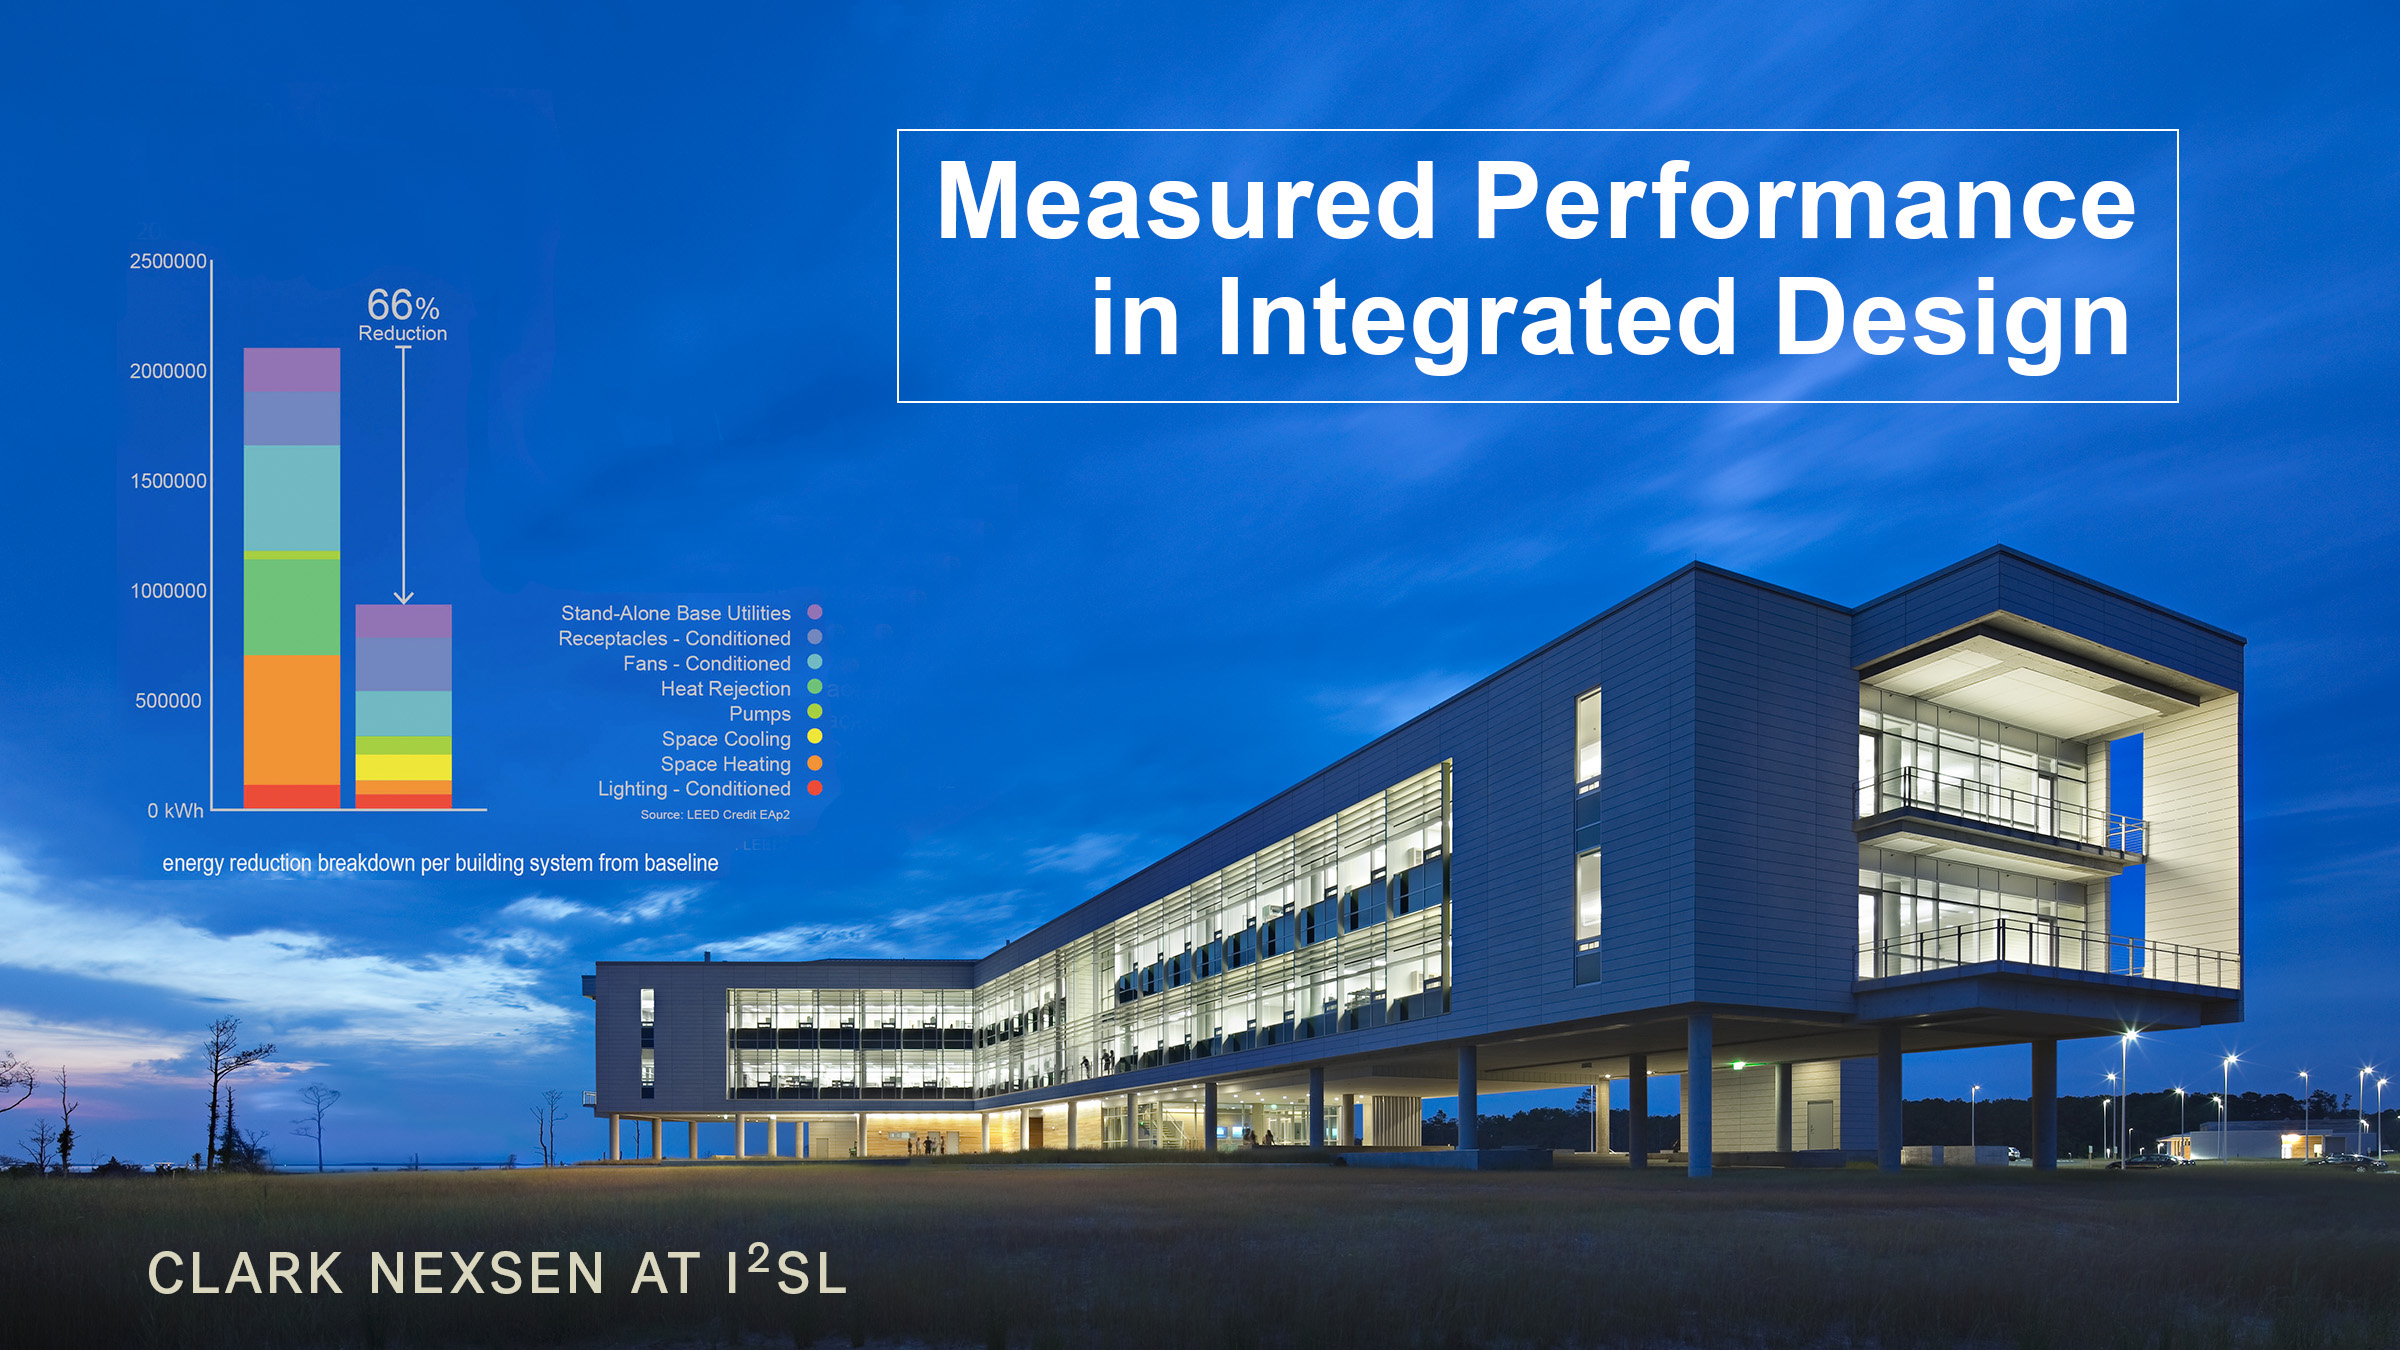 Measured Performance in Integrated Design